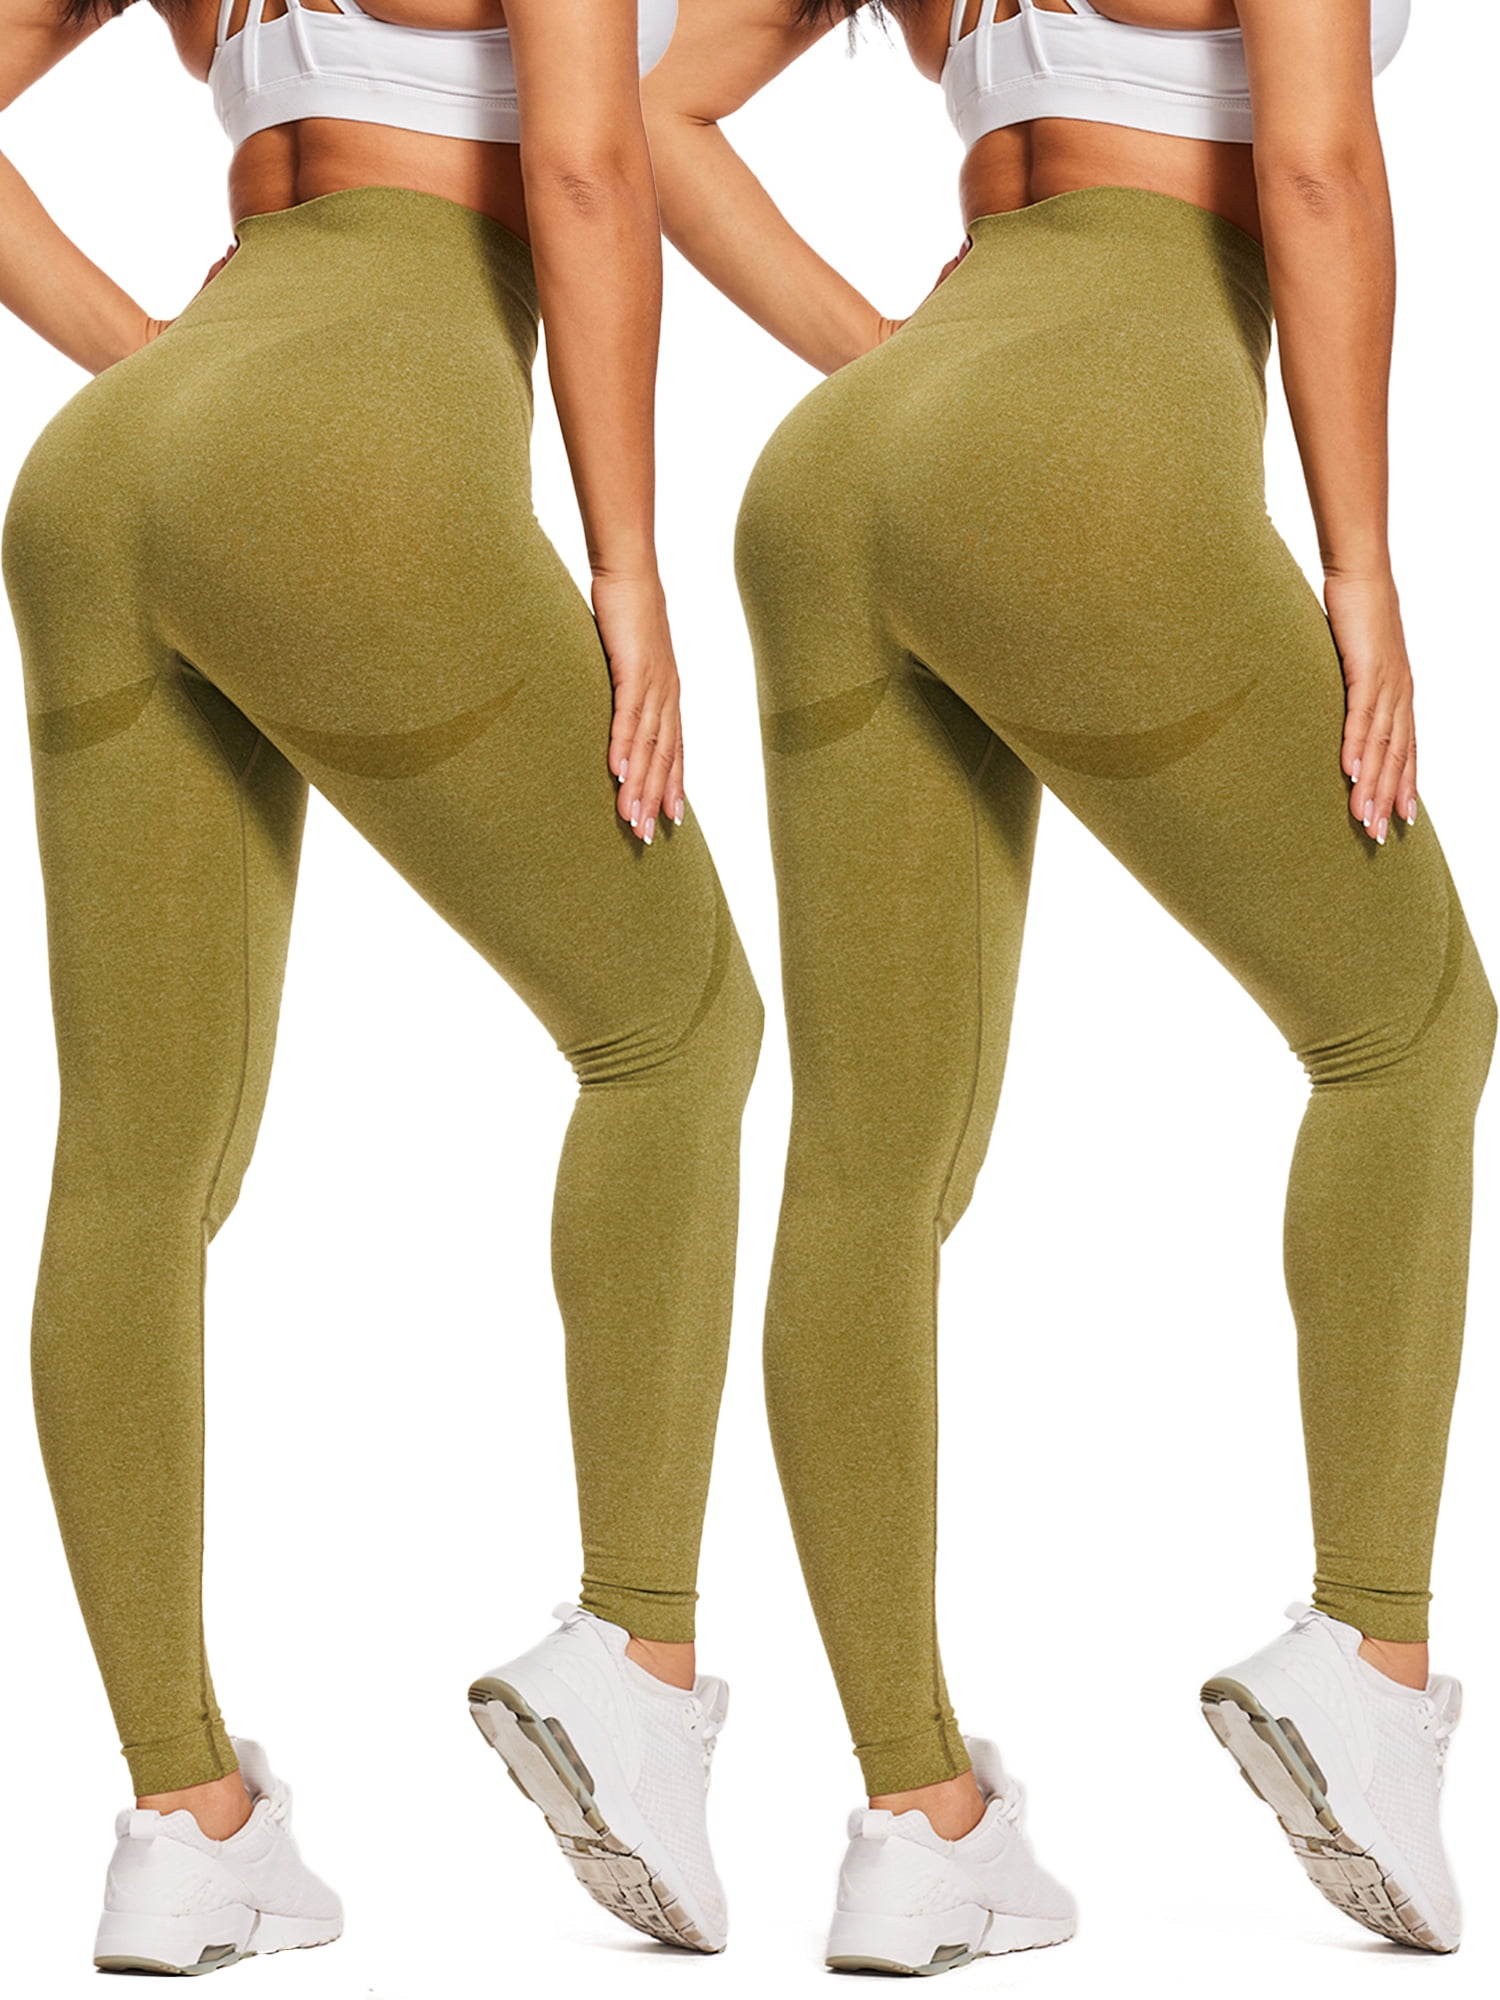 Womens Leggings-No See-Through High Waisted Tummy Control Yoga Pants  Workout Running Legging - Plus Size 